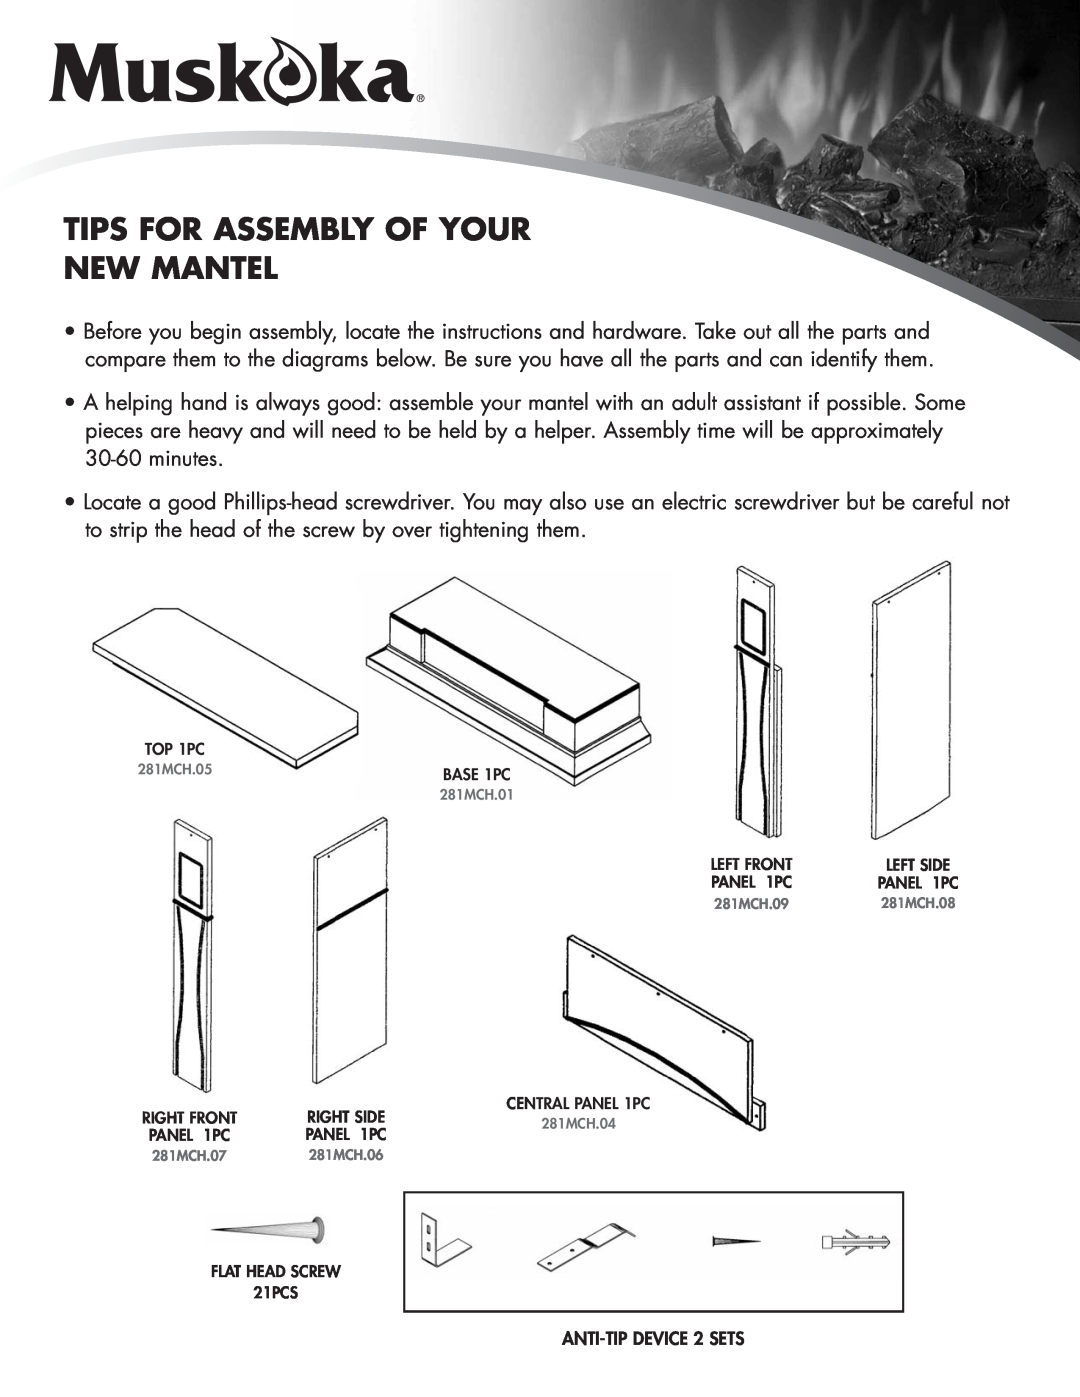 Greenway Home Products MM281MCH manual Tips For Assembly Of Your New Mantel, ANTI-TIPDEVICE 2 SETS 